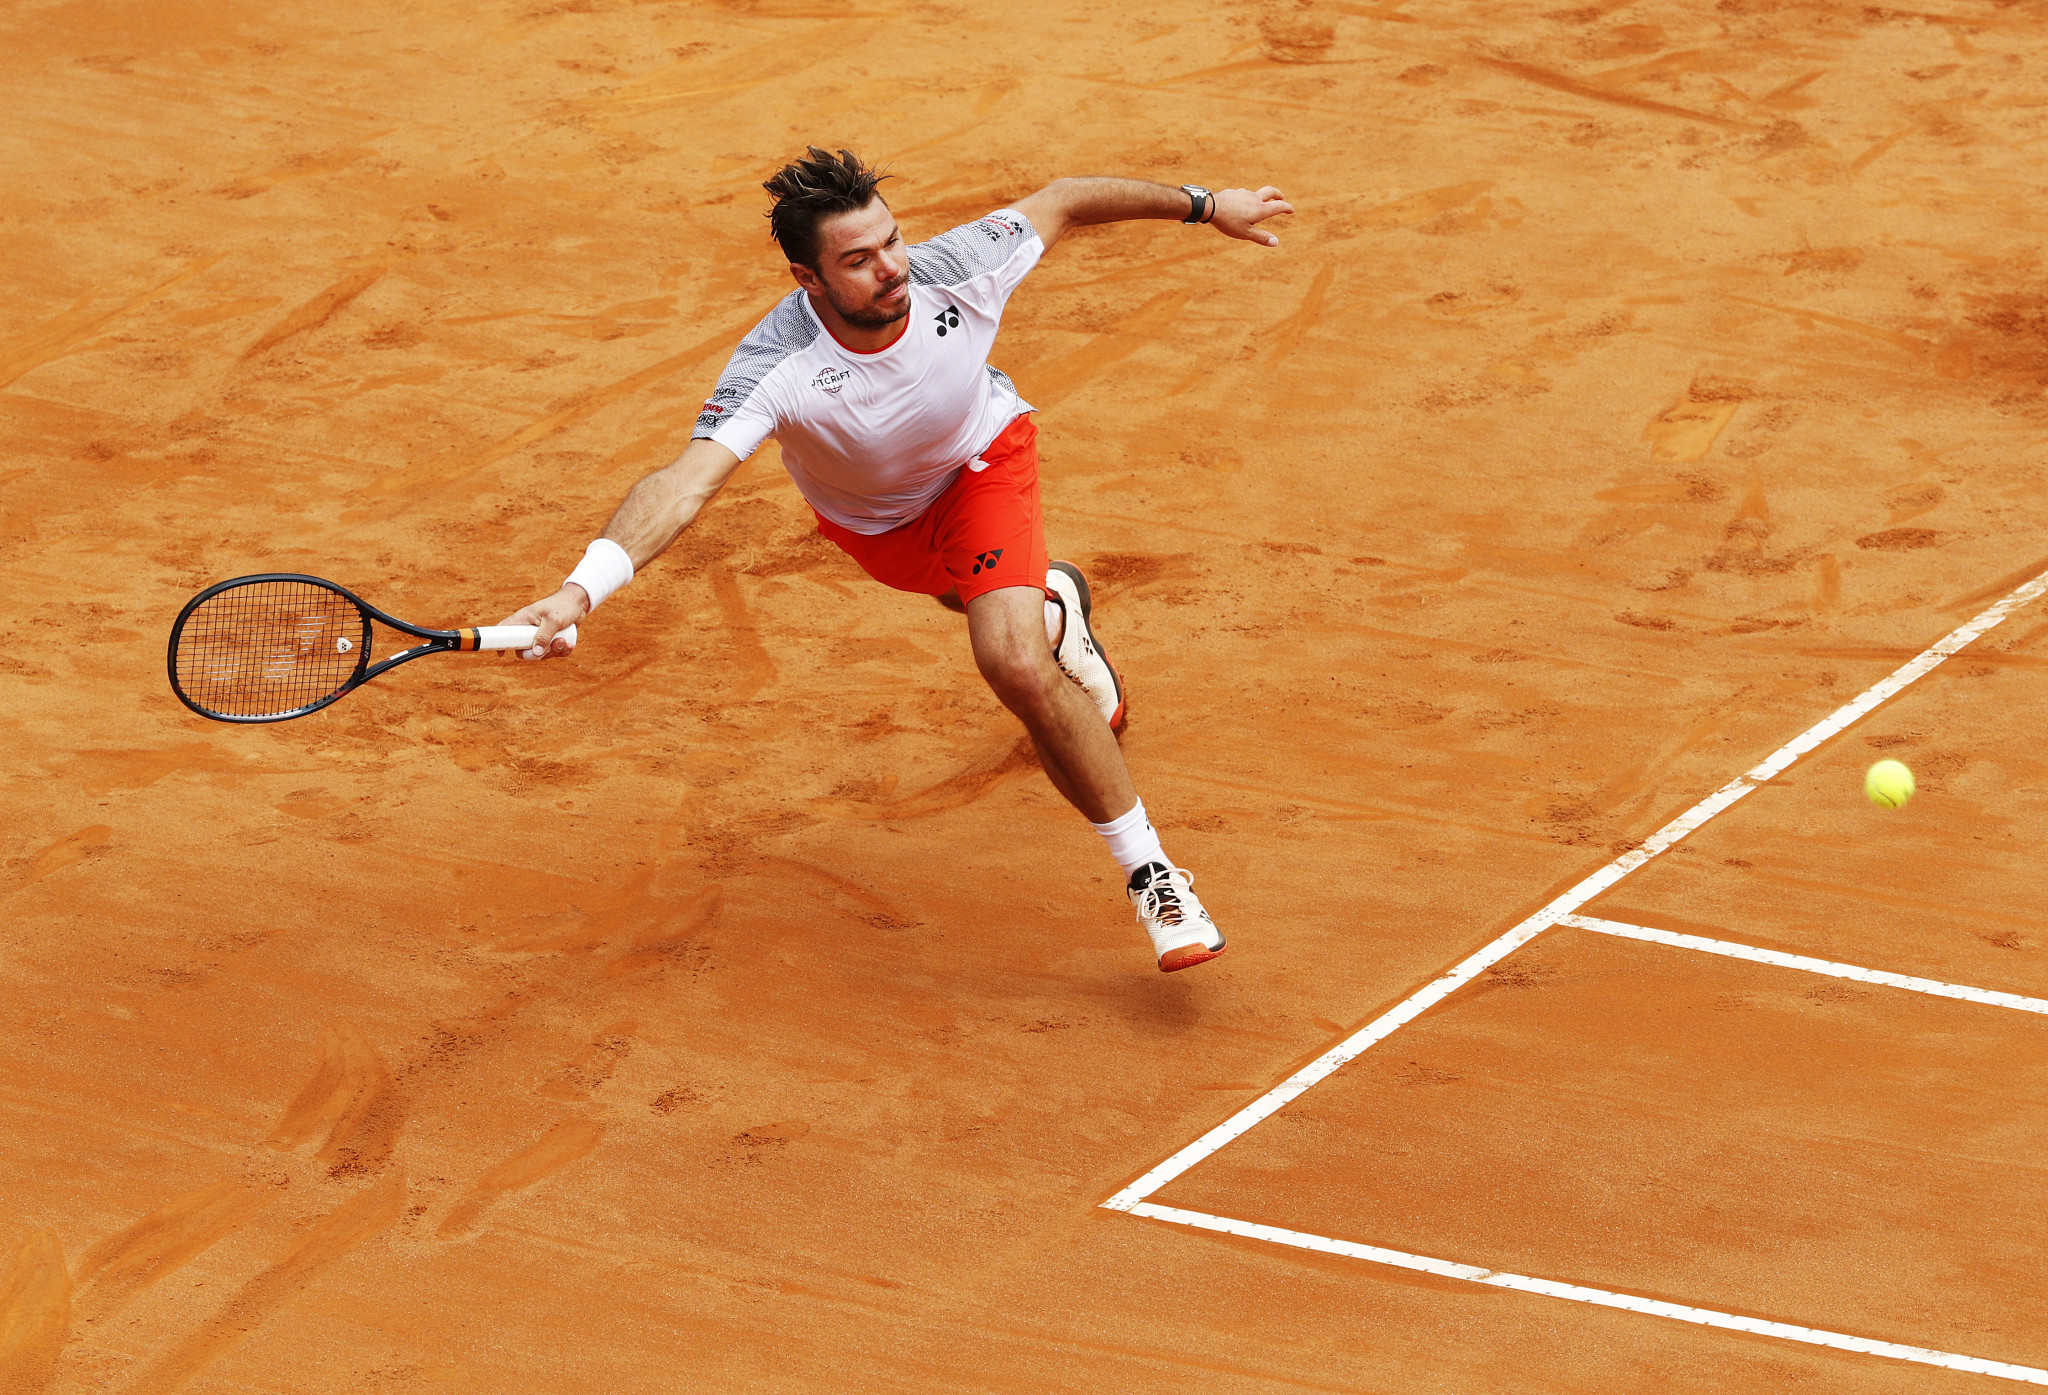 Switzerland's Stan Wawrinka, the 10th seed, was shocked by Italian qualifier Lorenzo Musetti in the first round in Rome ©Getty Images